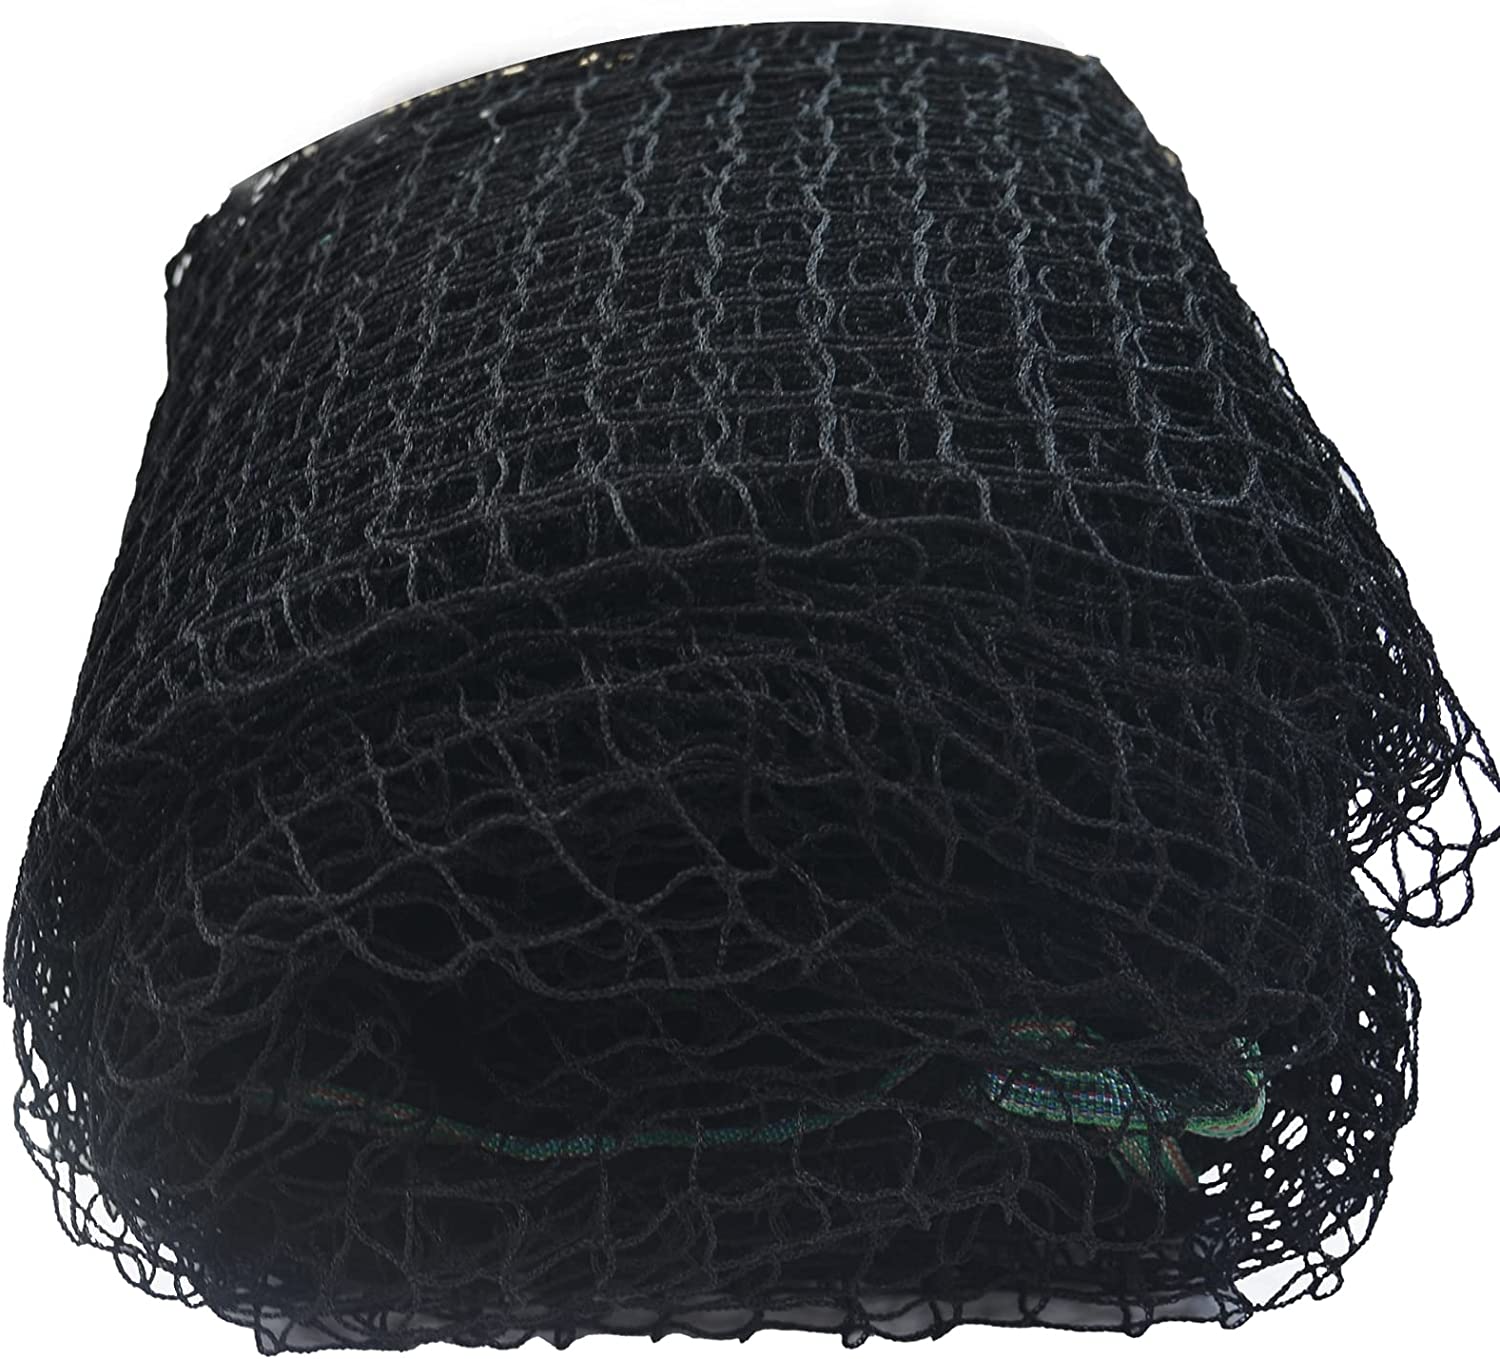 Gagalileo 33x12x10FT Baseball Batting Cage Replacement Net